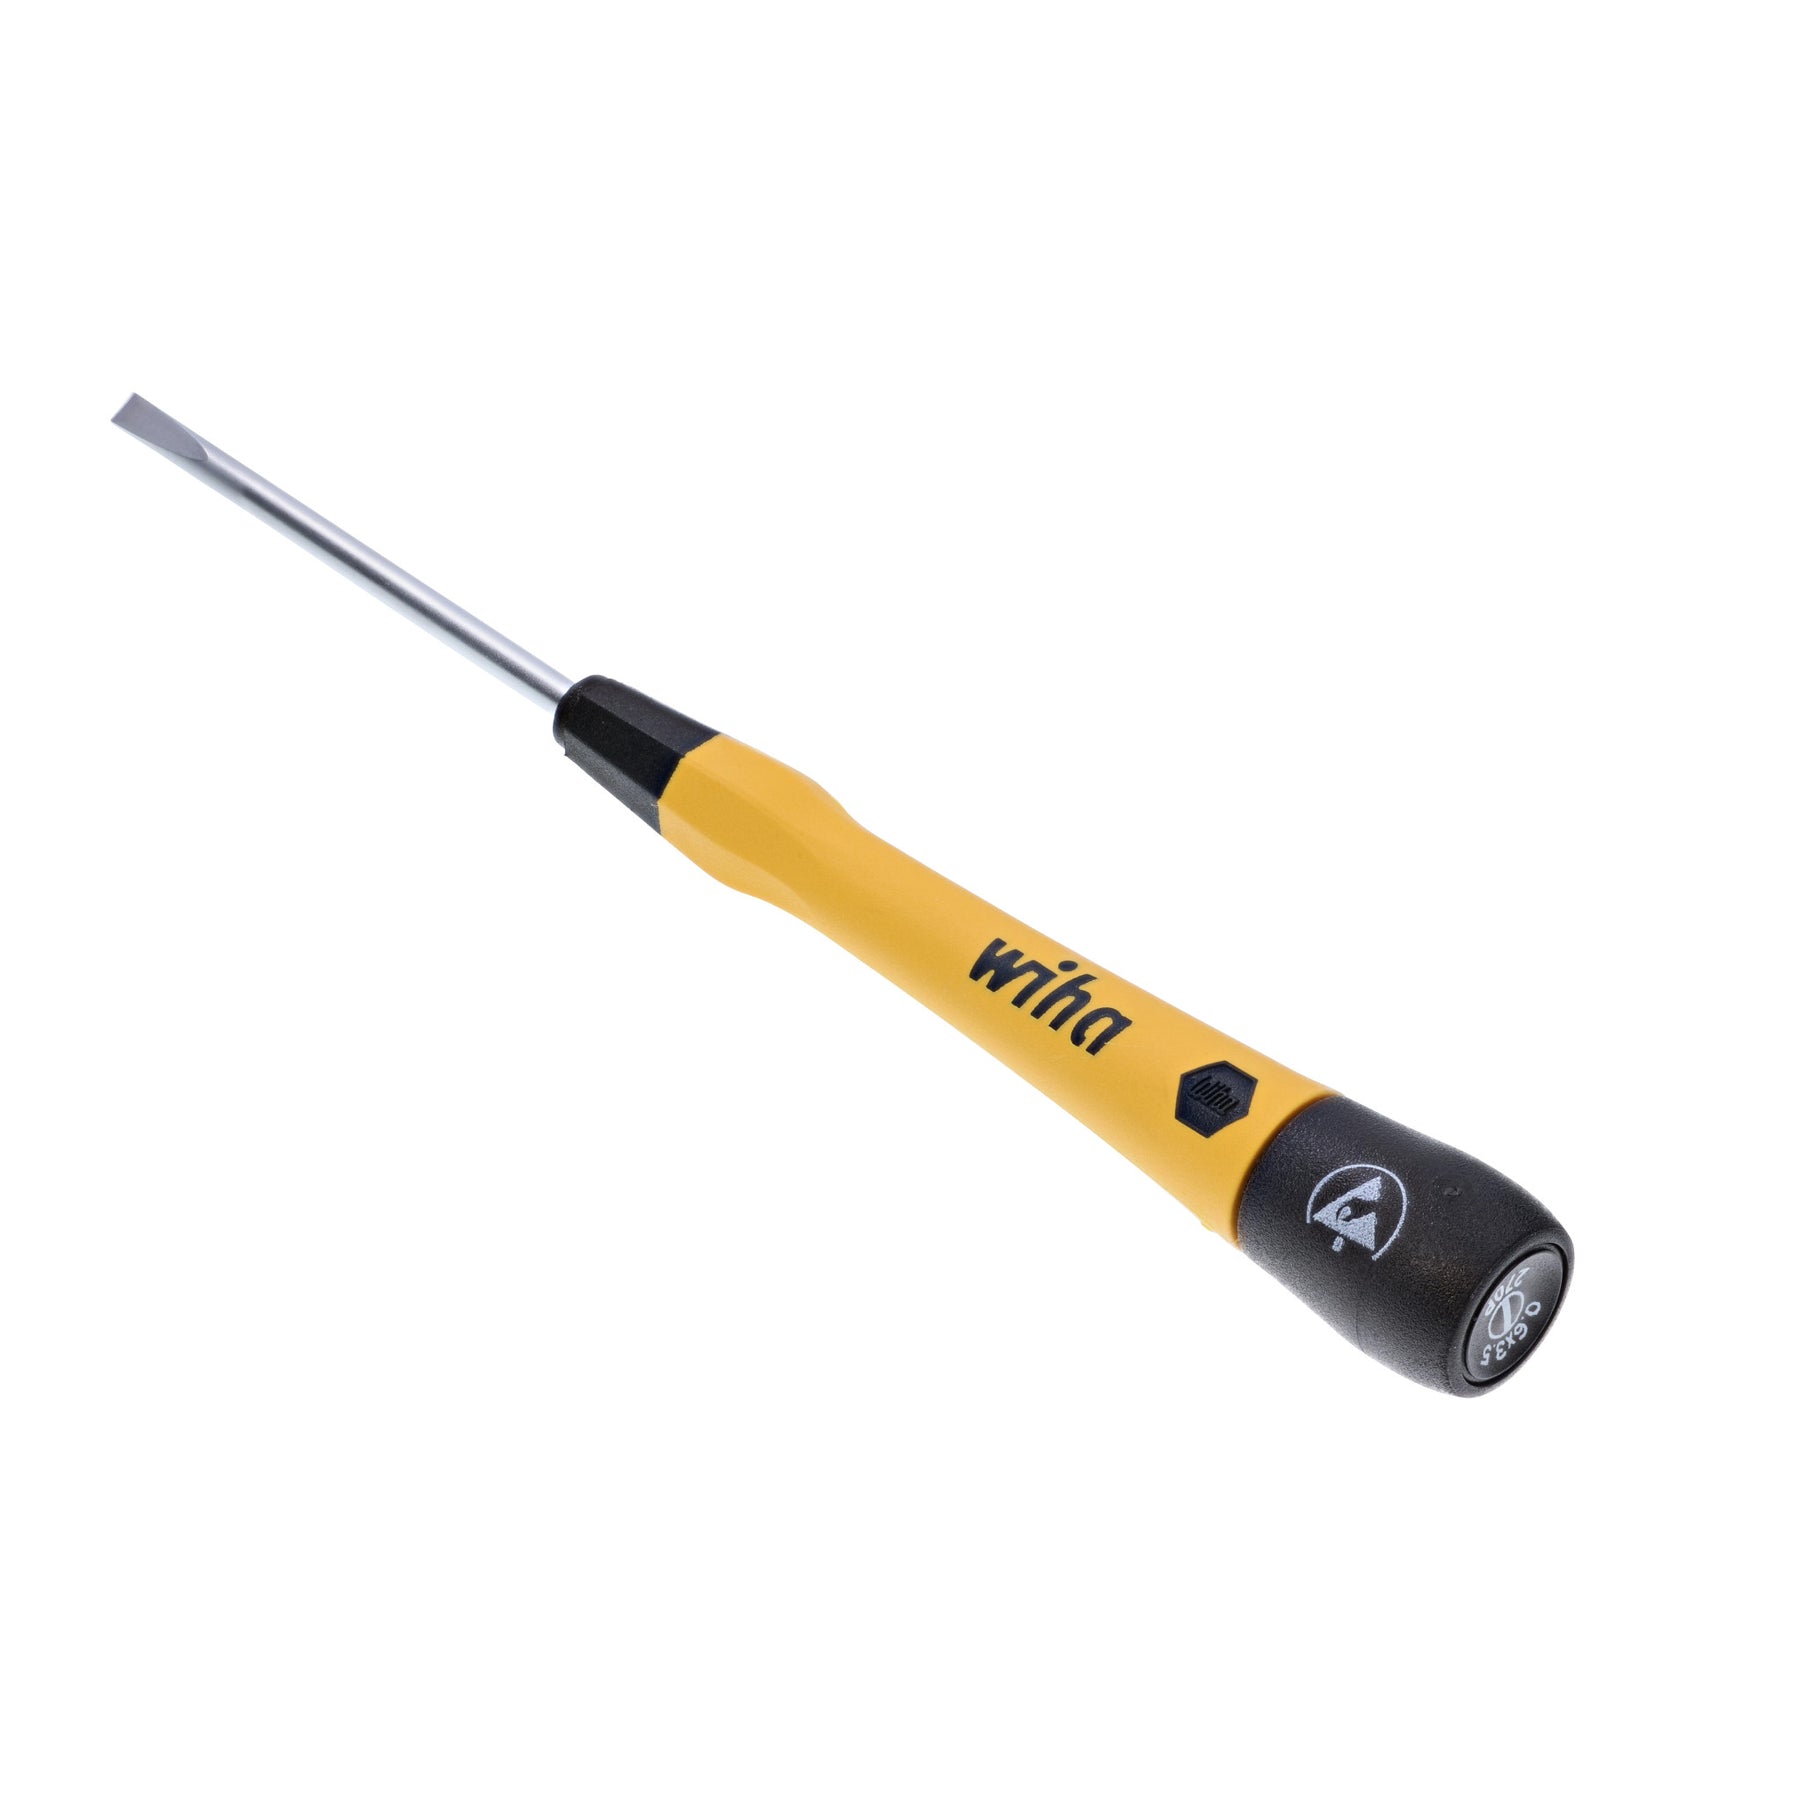 ESD Safe PicoFinish Precision Screwdriver - Slotted 3.5mm x 60mm